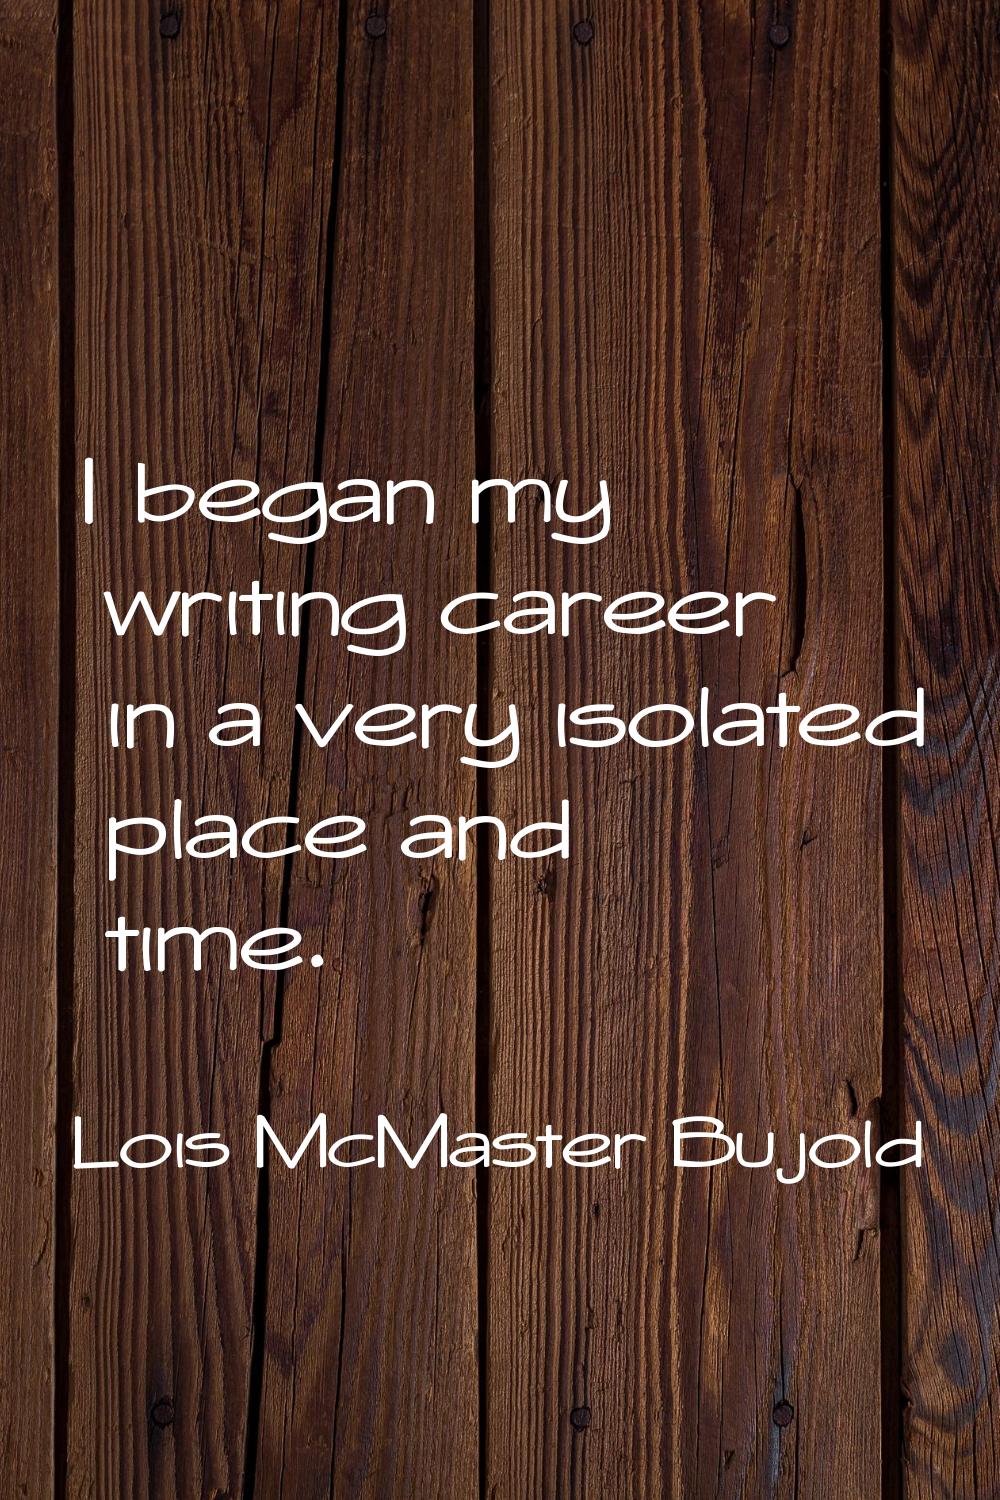 I began my writing career in a very isolated place and time.